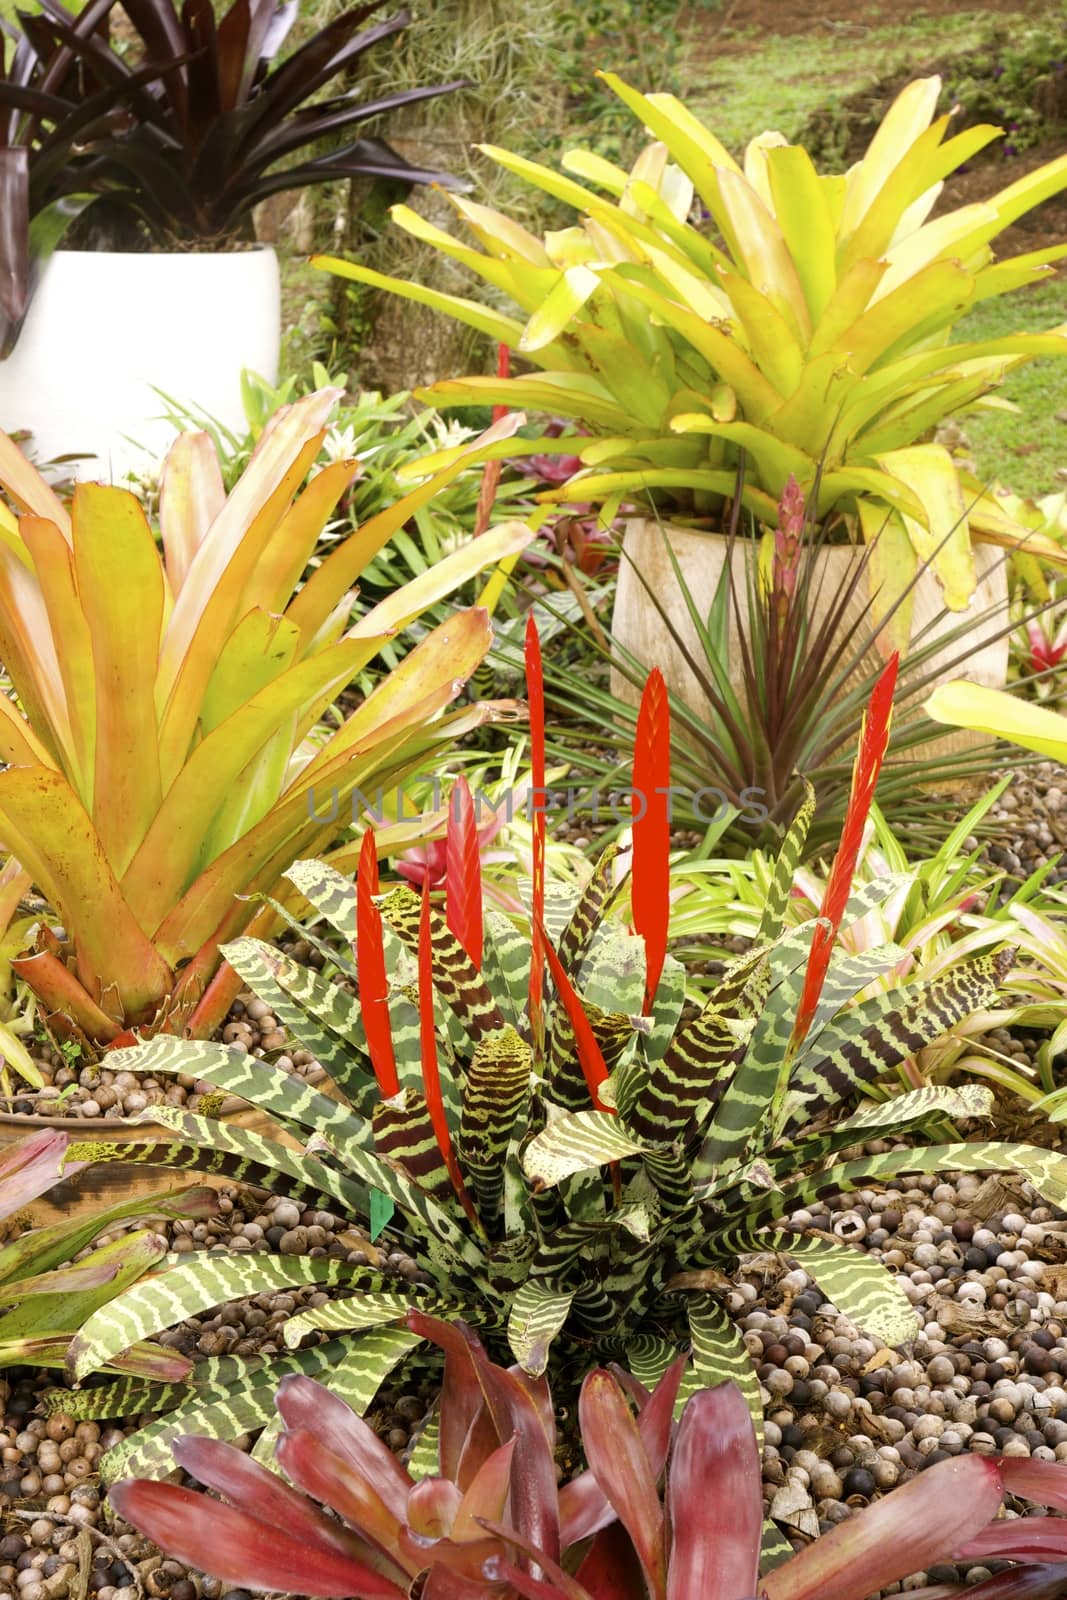 many kinds of bromeliad in tropical garden


